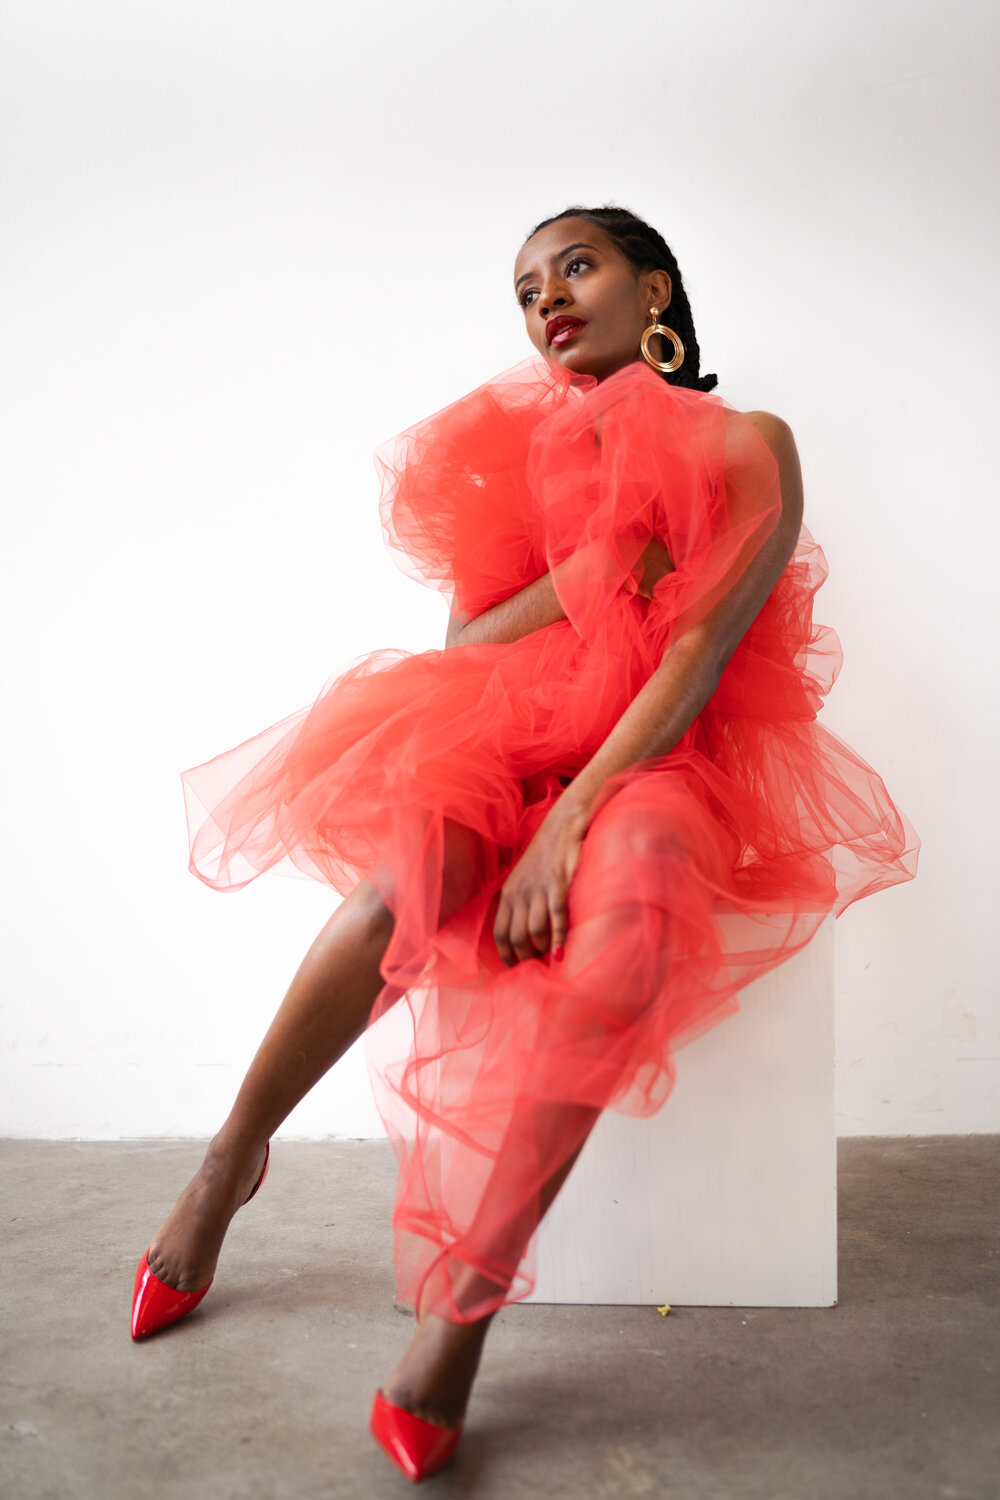 Ways to Practice Self-Love- Tulle Dress Pose